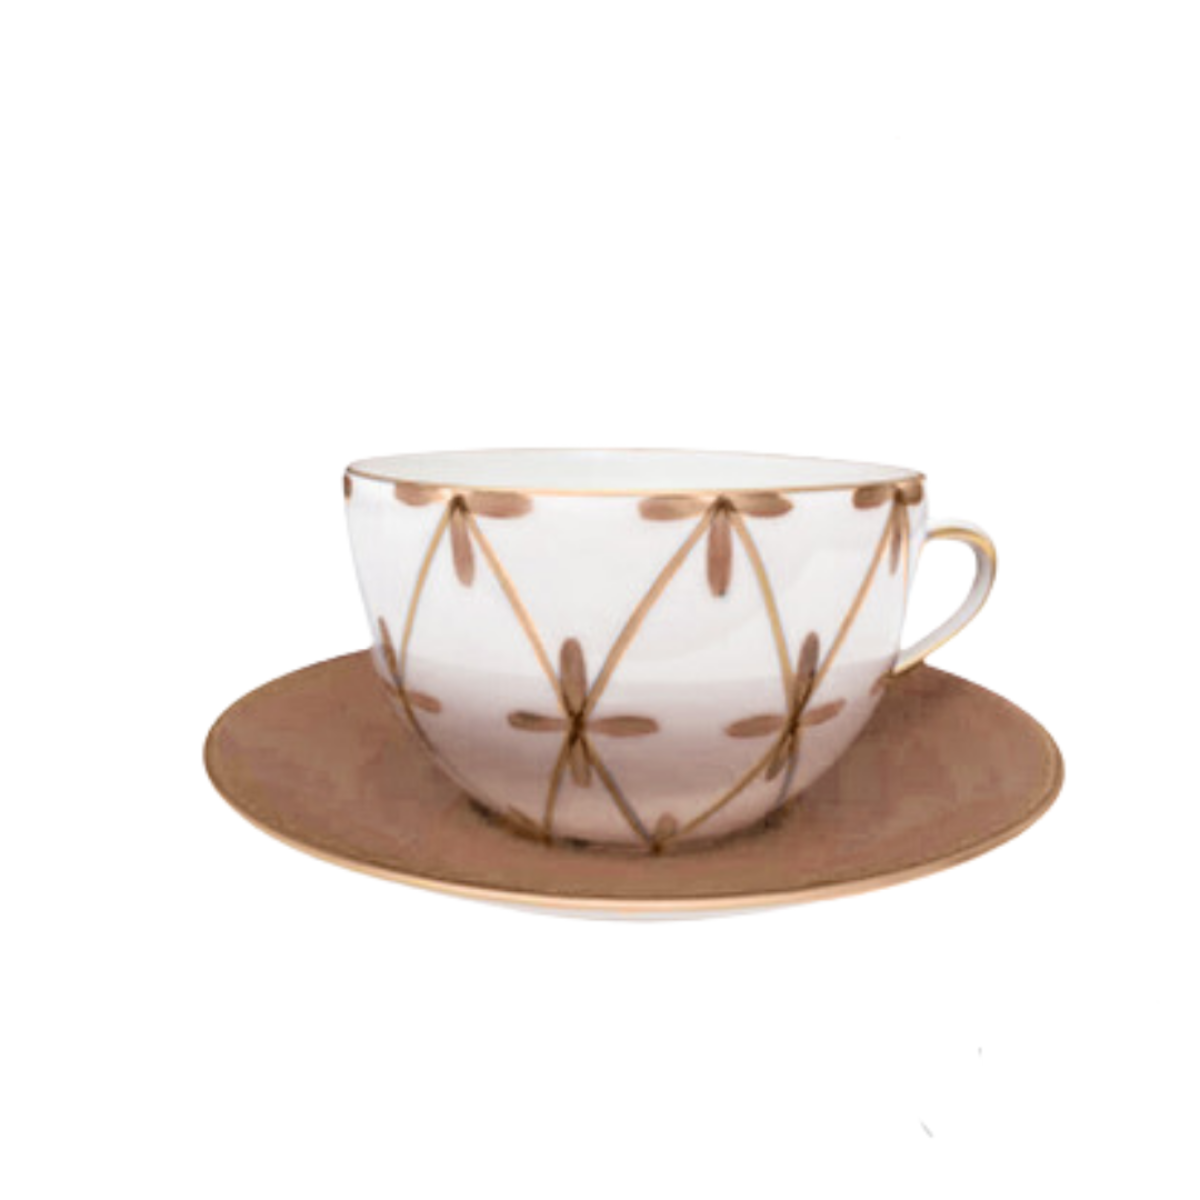 Marie Daâge Tambourin Round Breakfast Cup & Saucer, Champagne & Gold-Bespoke Designs